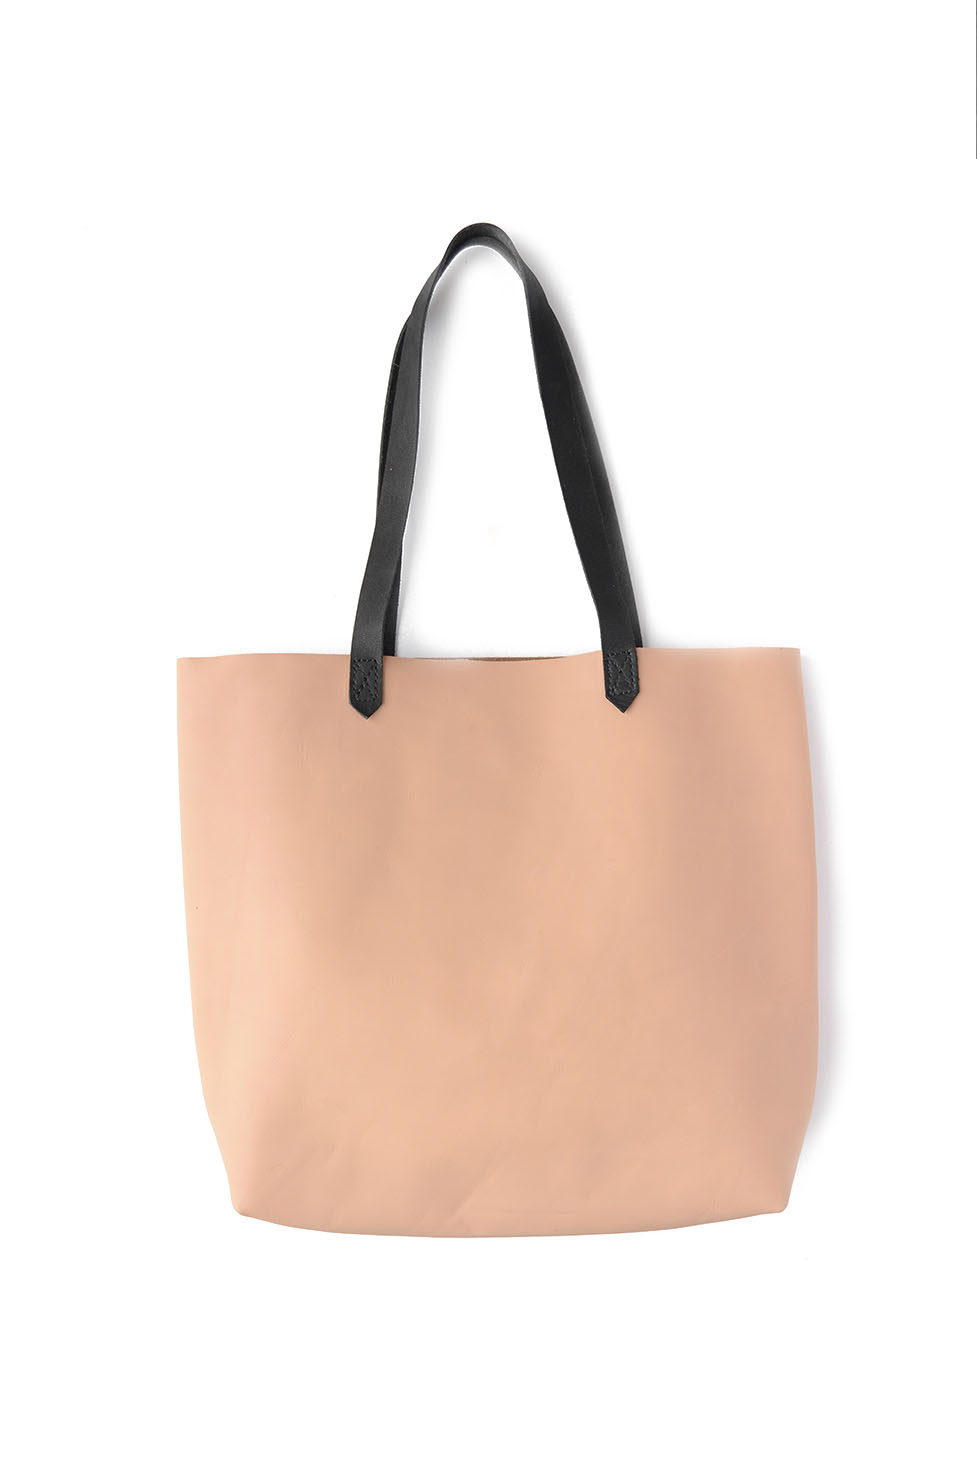 Tote Bag — Stitch & Shutter Leather Goods